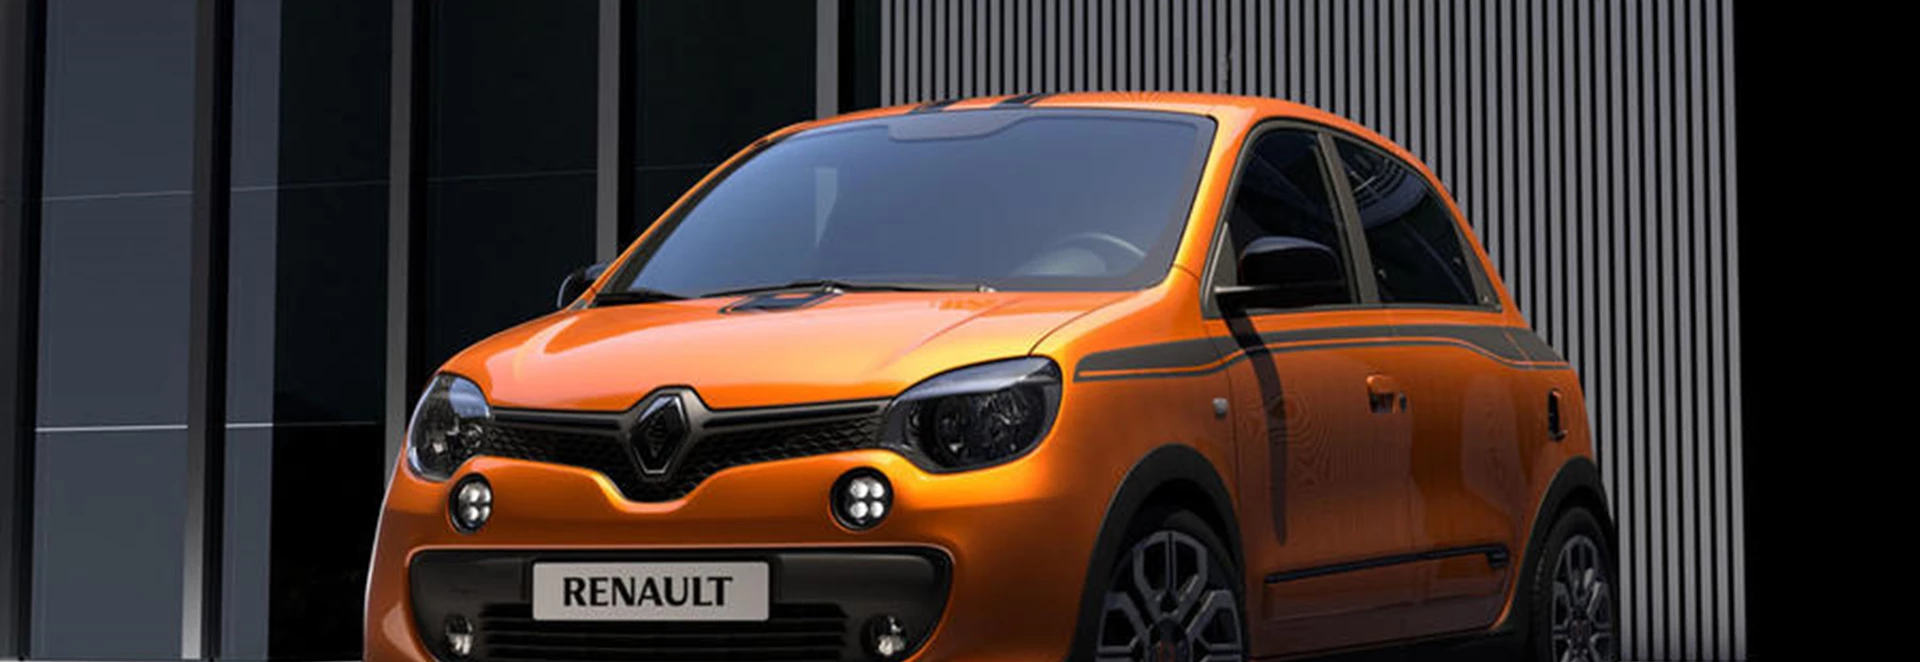 Prices unveiled for the sporty new Renault Twingo GT